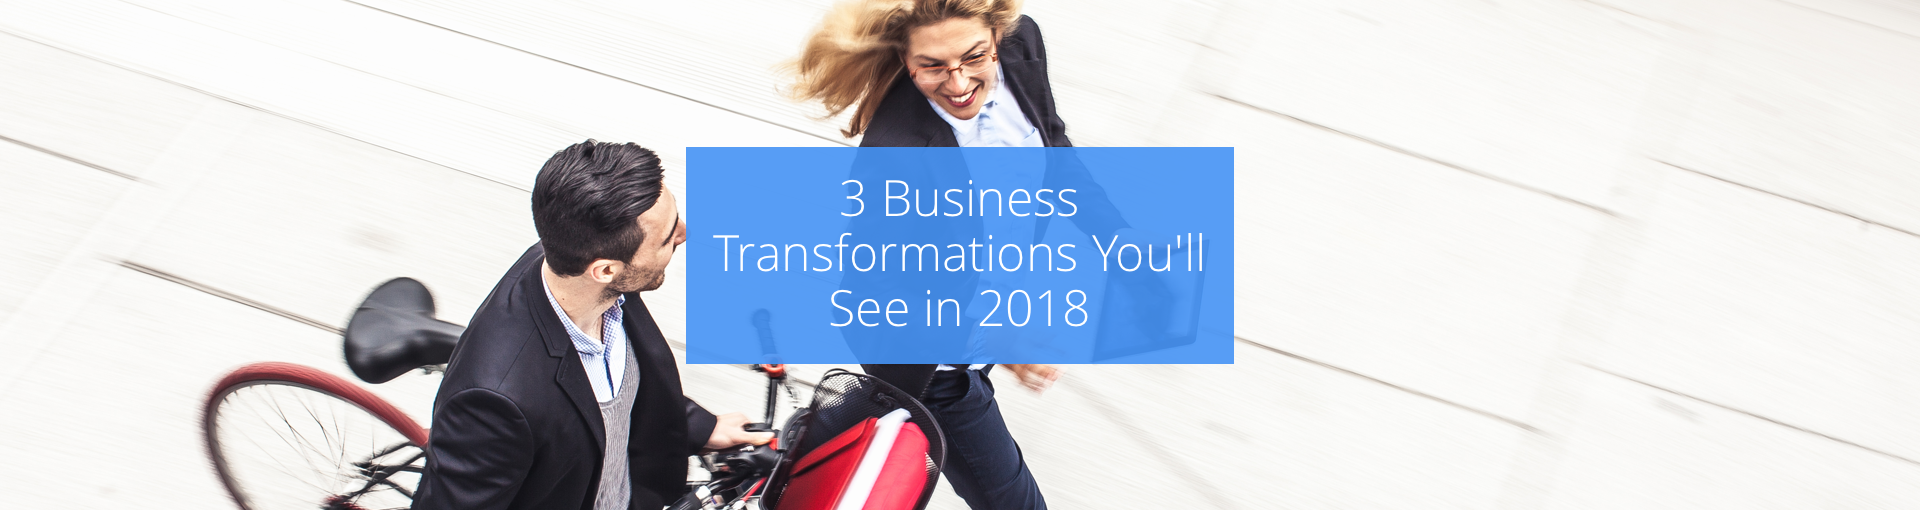 3 Business Transformations You'll See in 2018 Featured Image